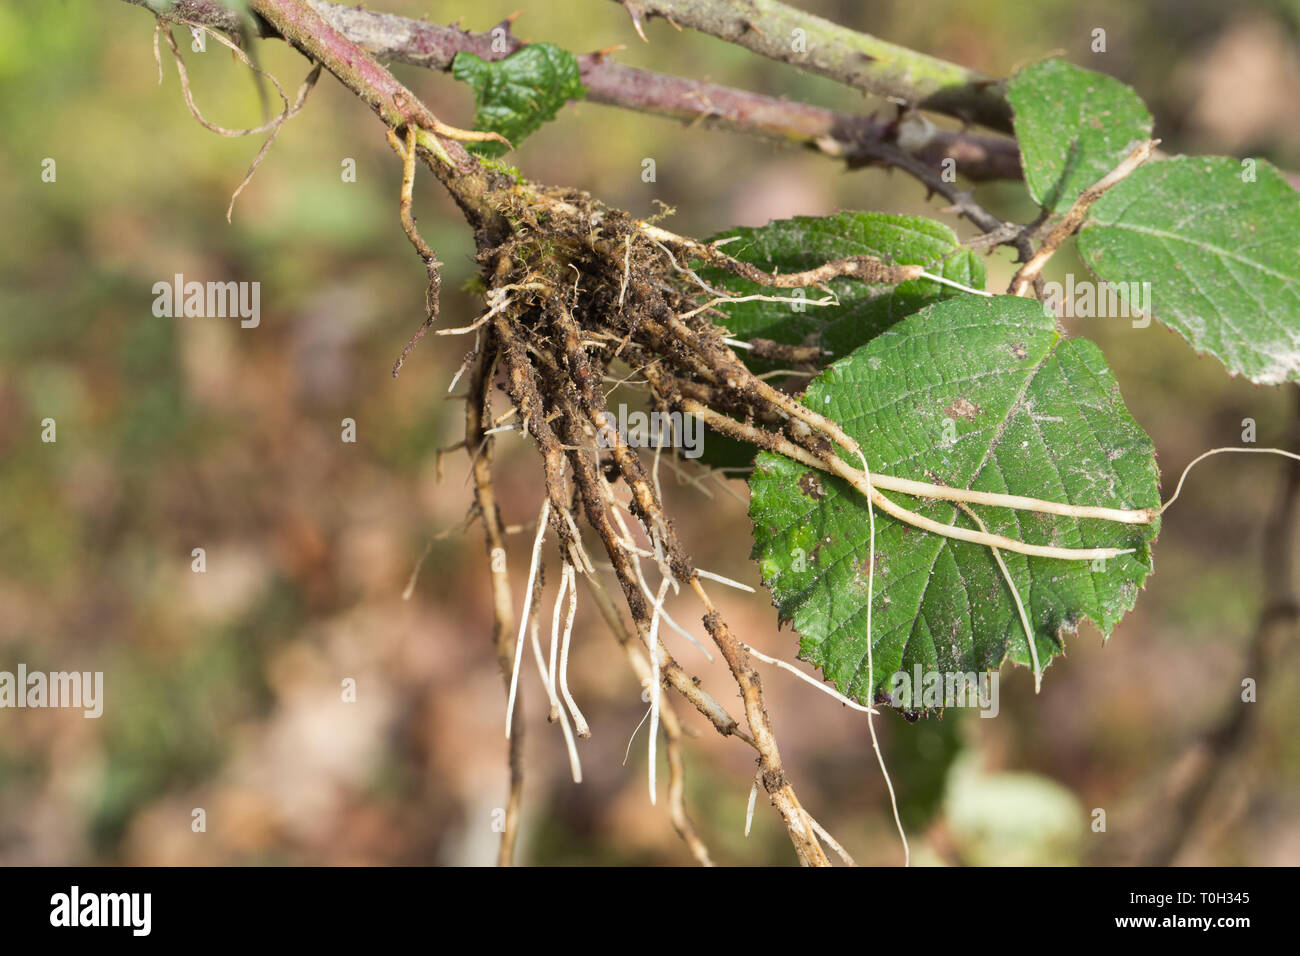 Bramble or Blackberry (Rubus fruticosus). Leaves and section of sprawling, clambering, climbing stem - as long as 5m. rooting where it touches the ground. Here an uprooted terminal tip. Stock Photo